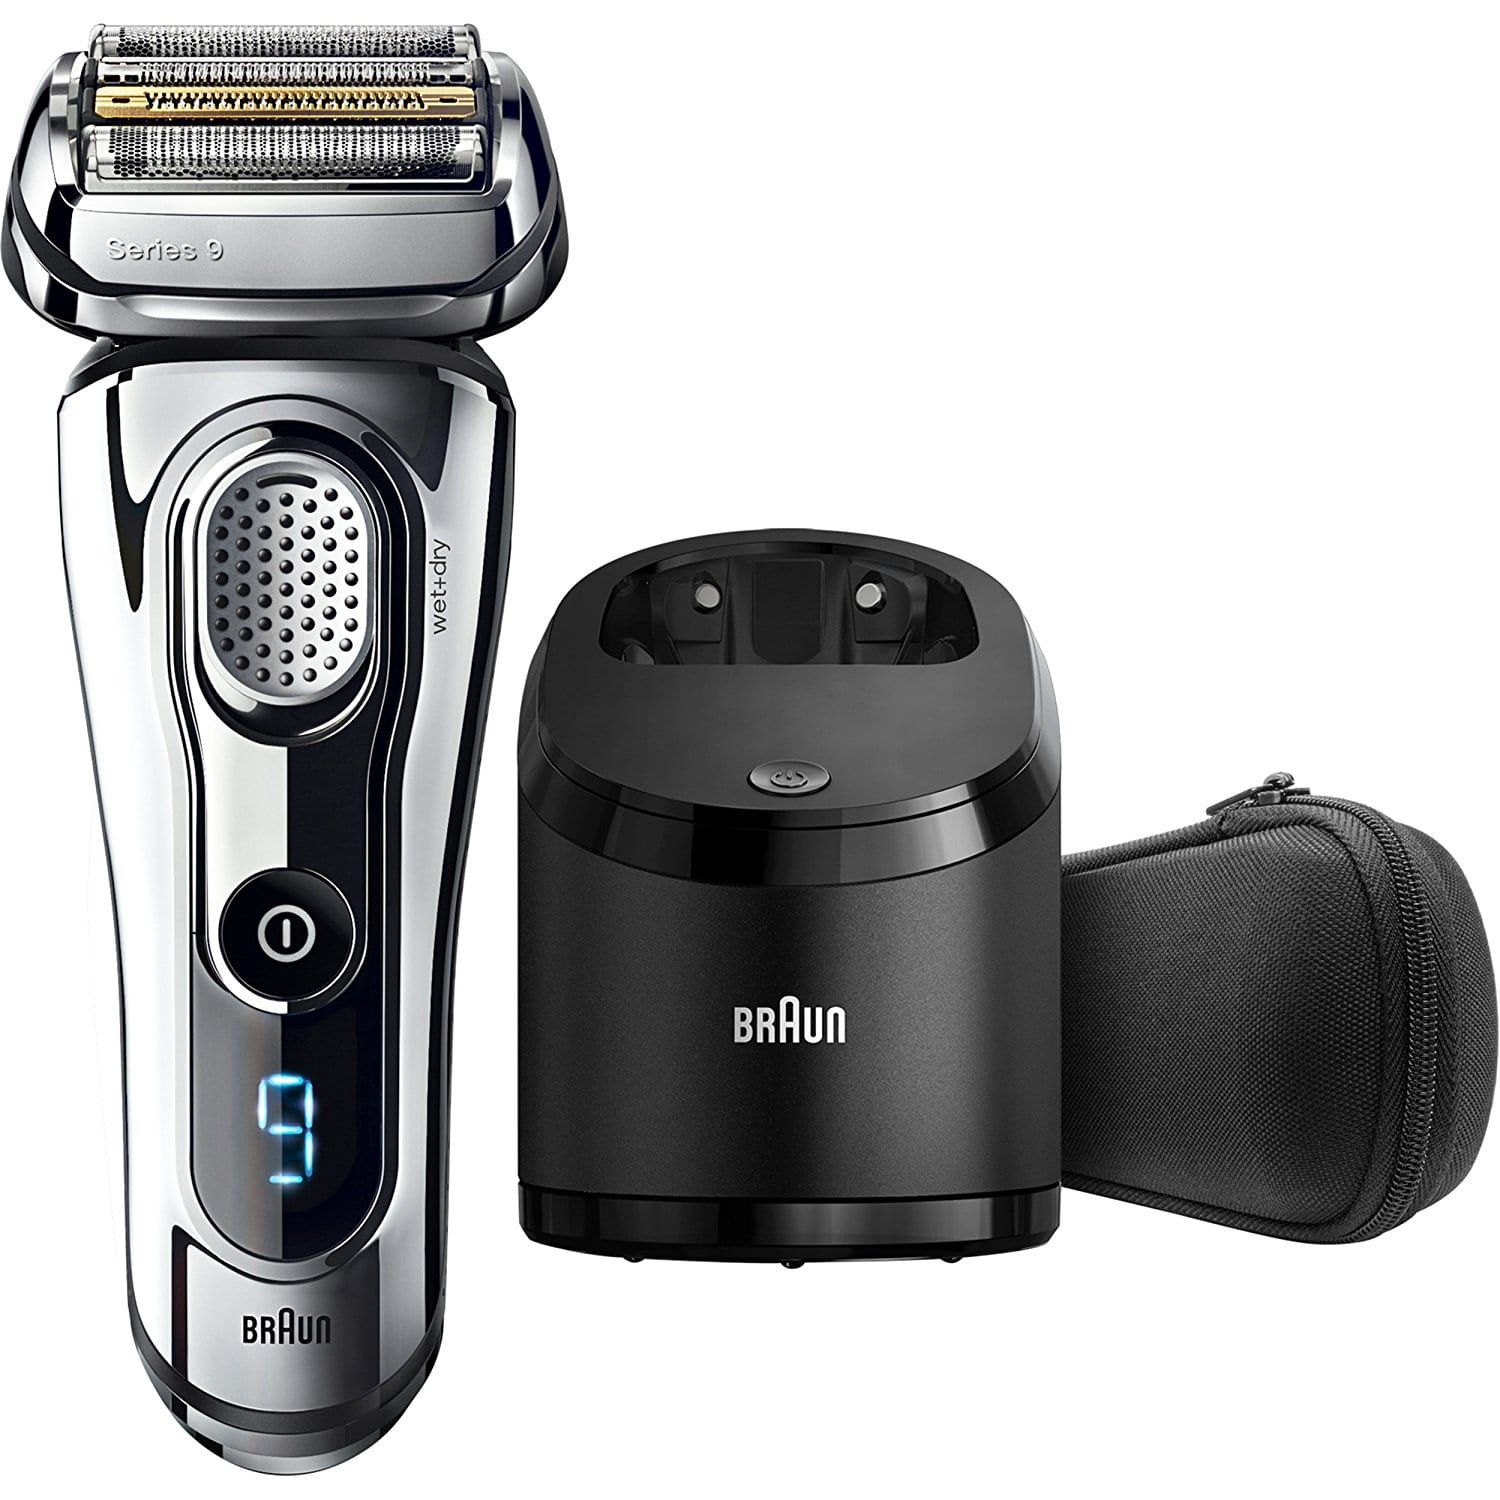 Christmas Gifts for Men 2017: Electric Shaver By Braun 2017 - 2018